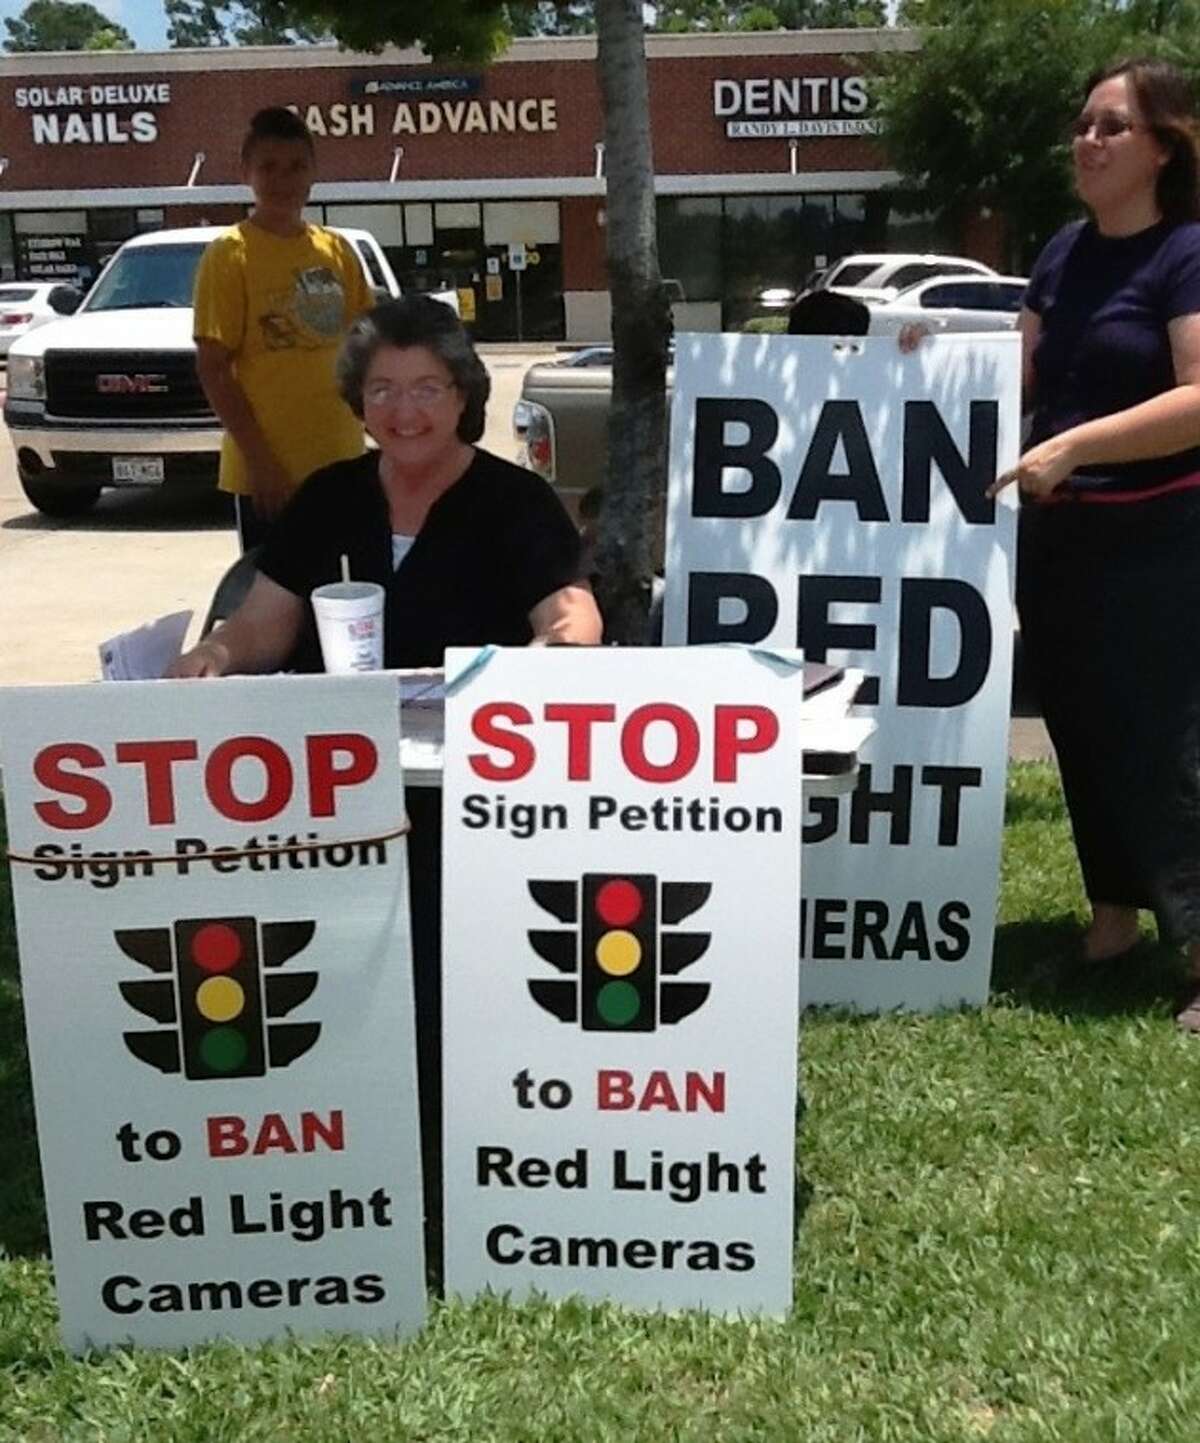 Opponents of Cleveland's red light camera system gather near Walmart to collect signatures in order to have the devices removed.